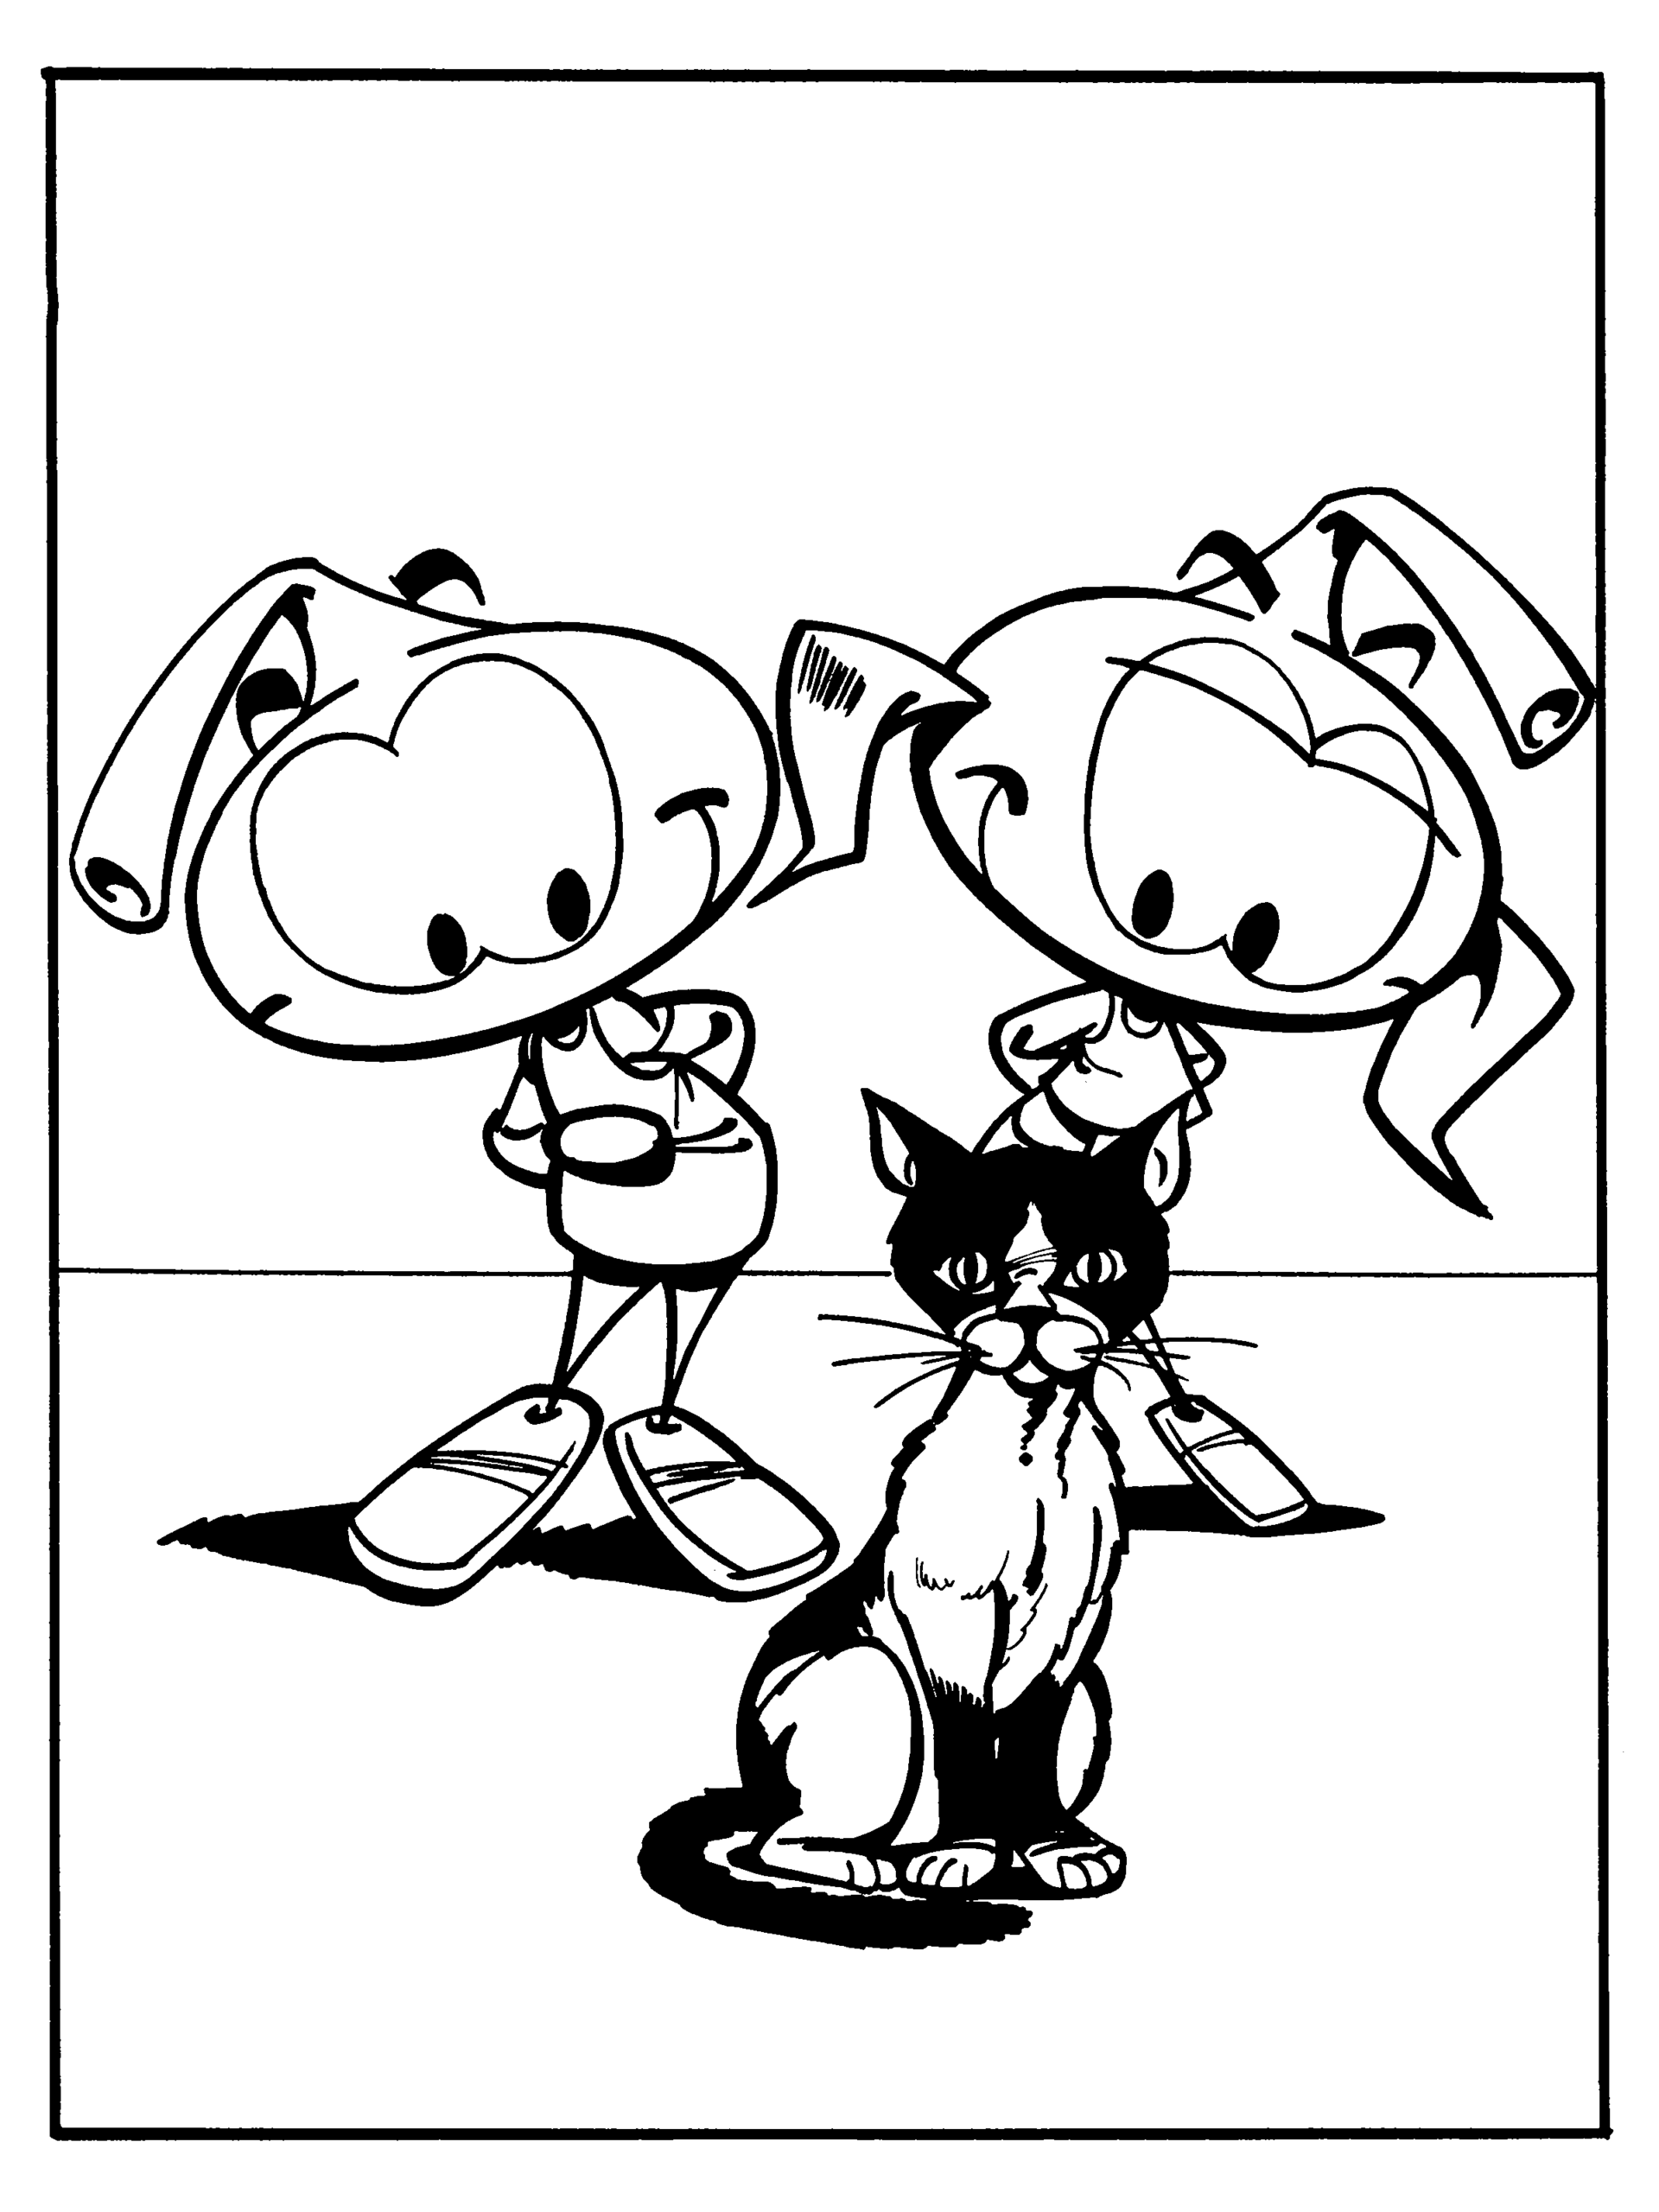 Snorks Coloring Pages TV Film snorks 29 Printable 2020 07662 Coloring4free